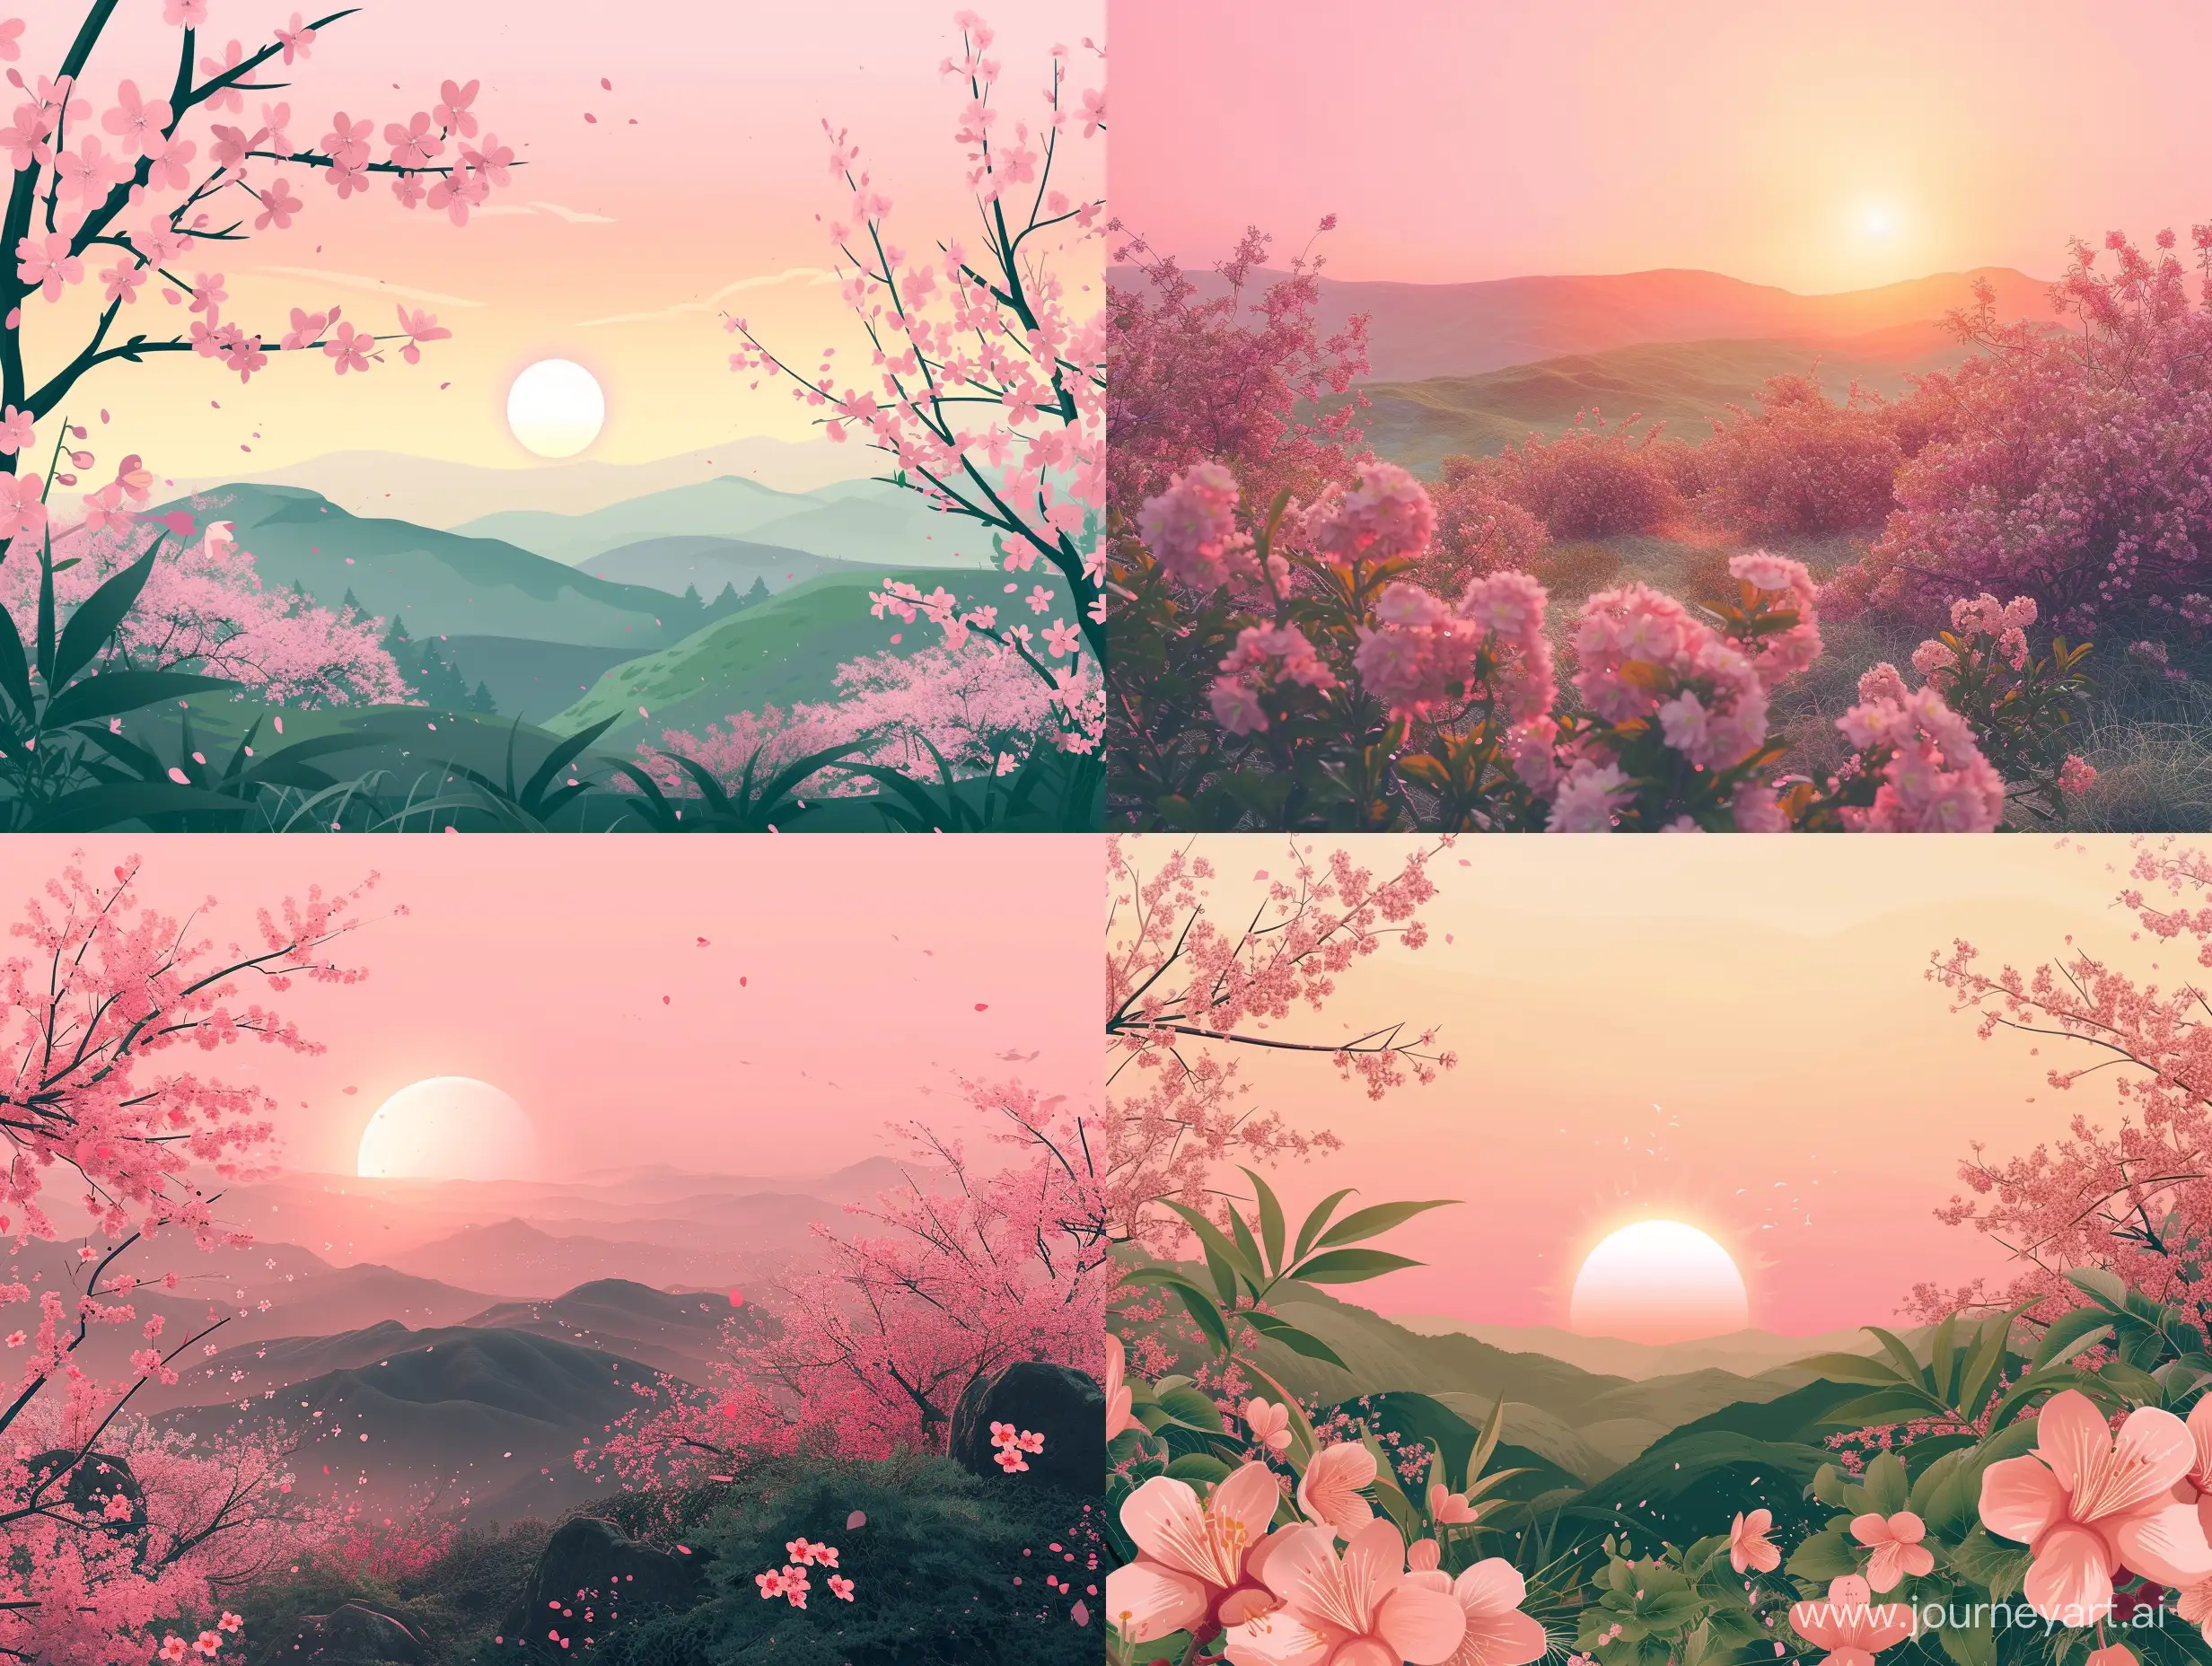 Picturesque-Spring-Blossoms-Landscape-with-Glowing-Pink-Sun-and-Hills